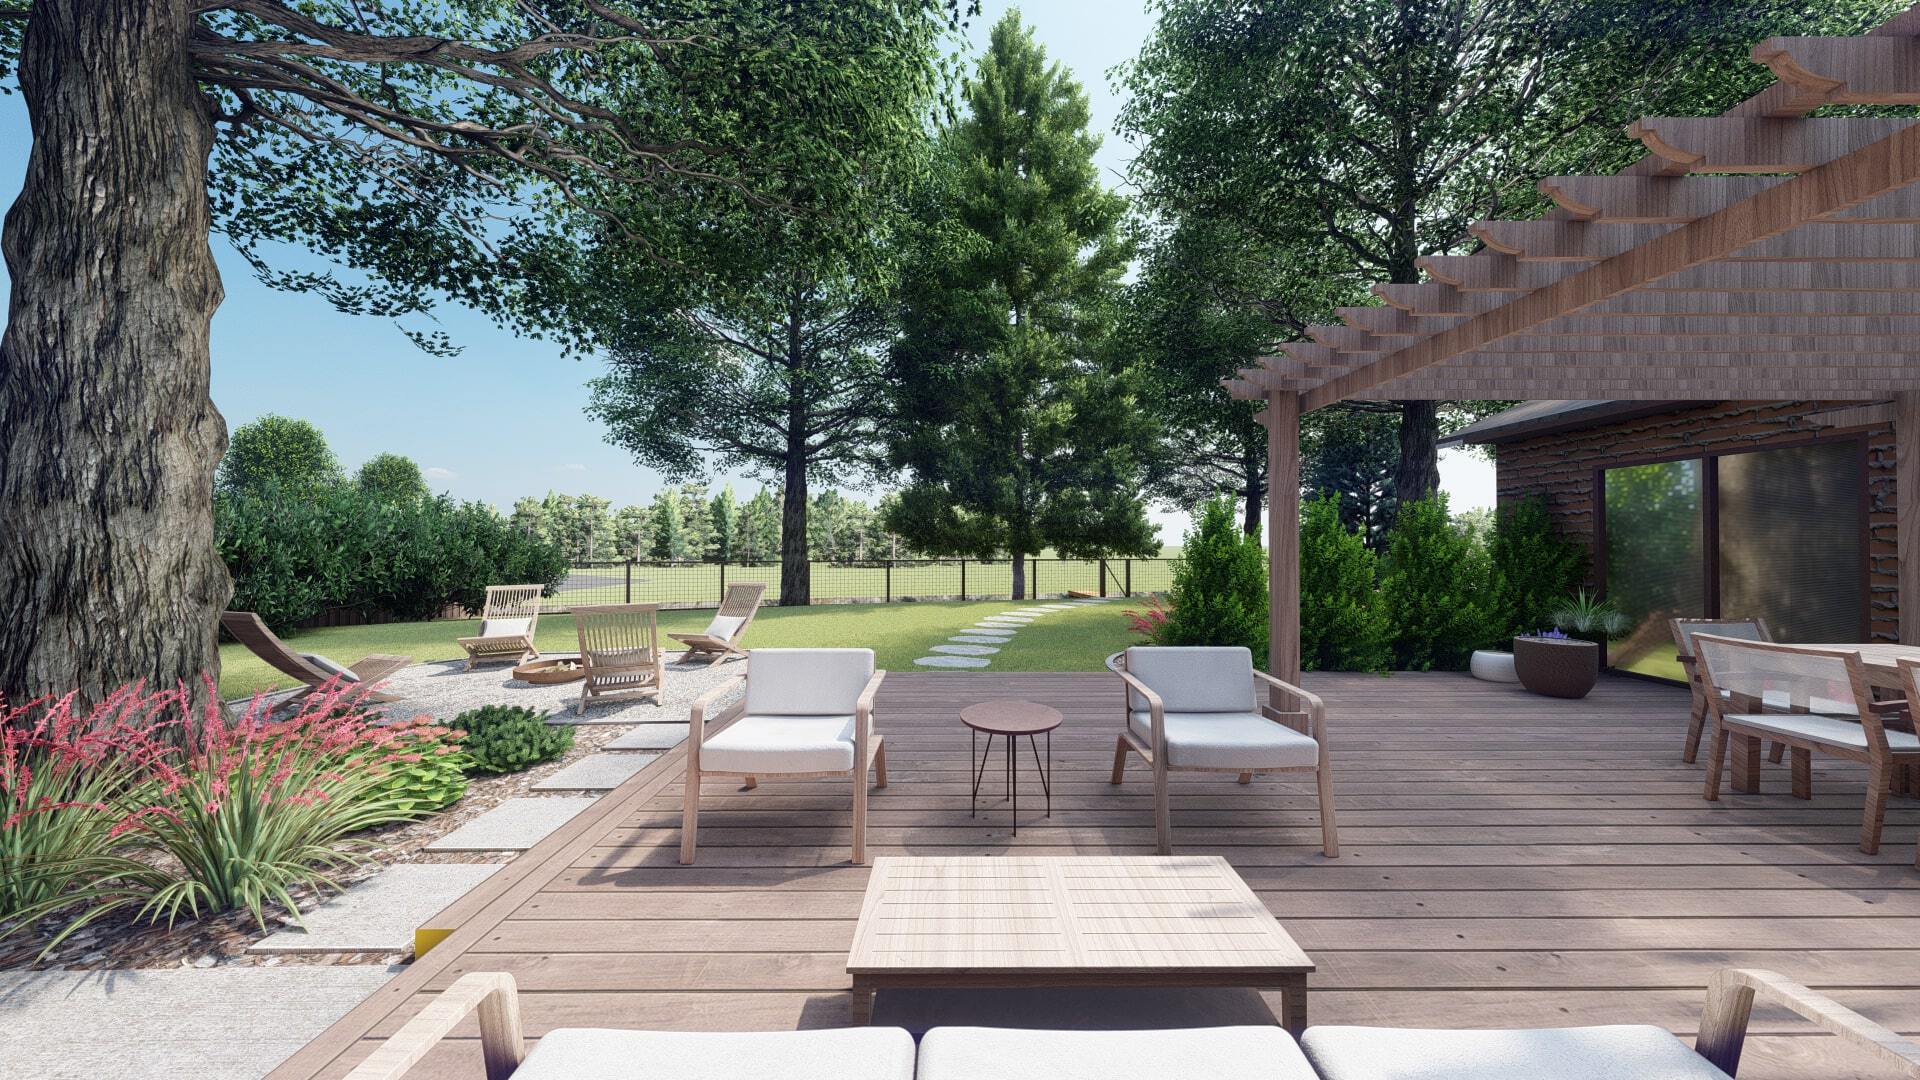 a backyard deck with a lounge area. A mature tree and pergola provide shade. Large evergreens provide privacy from the neighbors